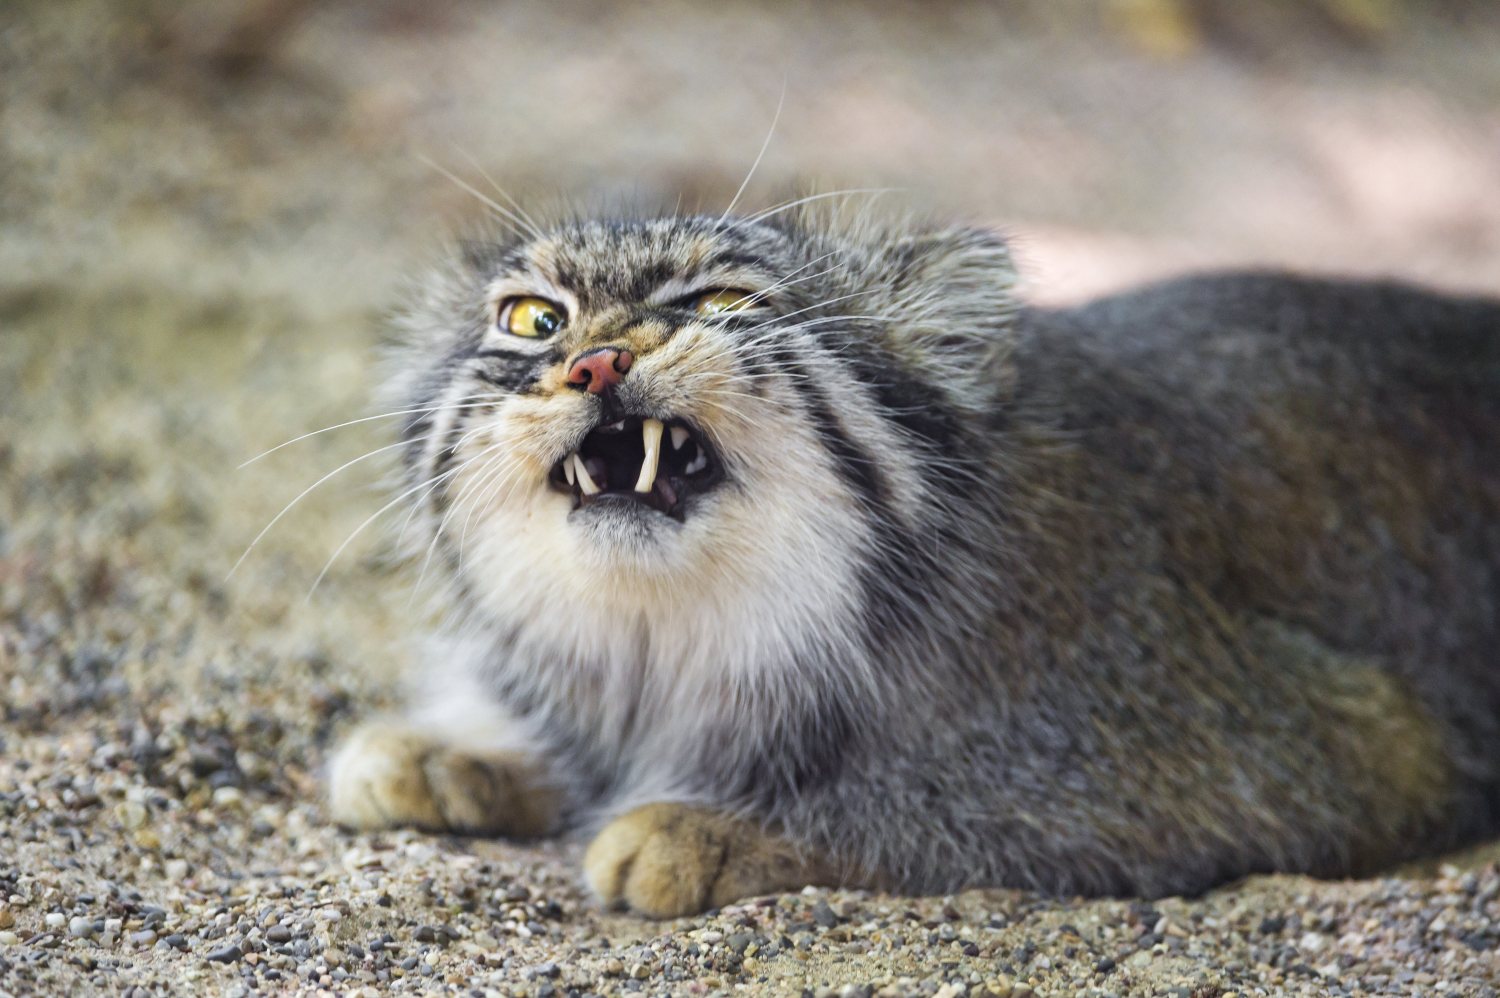 The Ugliest Cats In The World – Here Are The 6 Weirdest-looking Cat Breeds